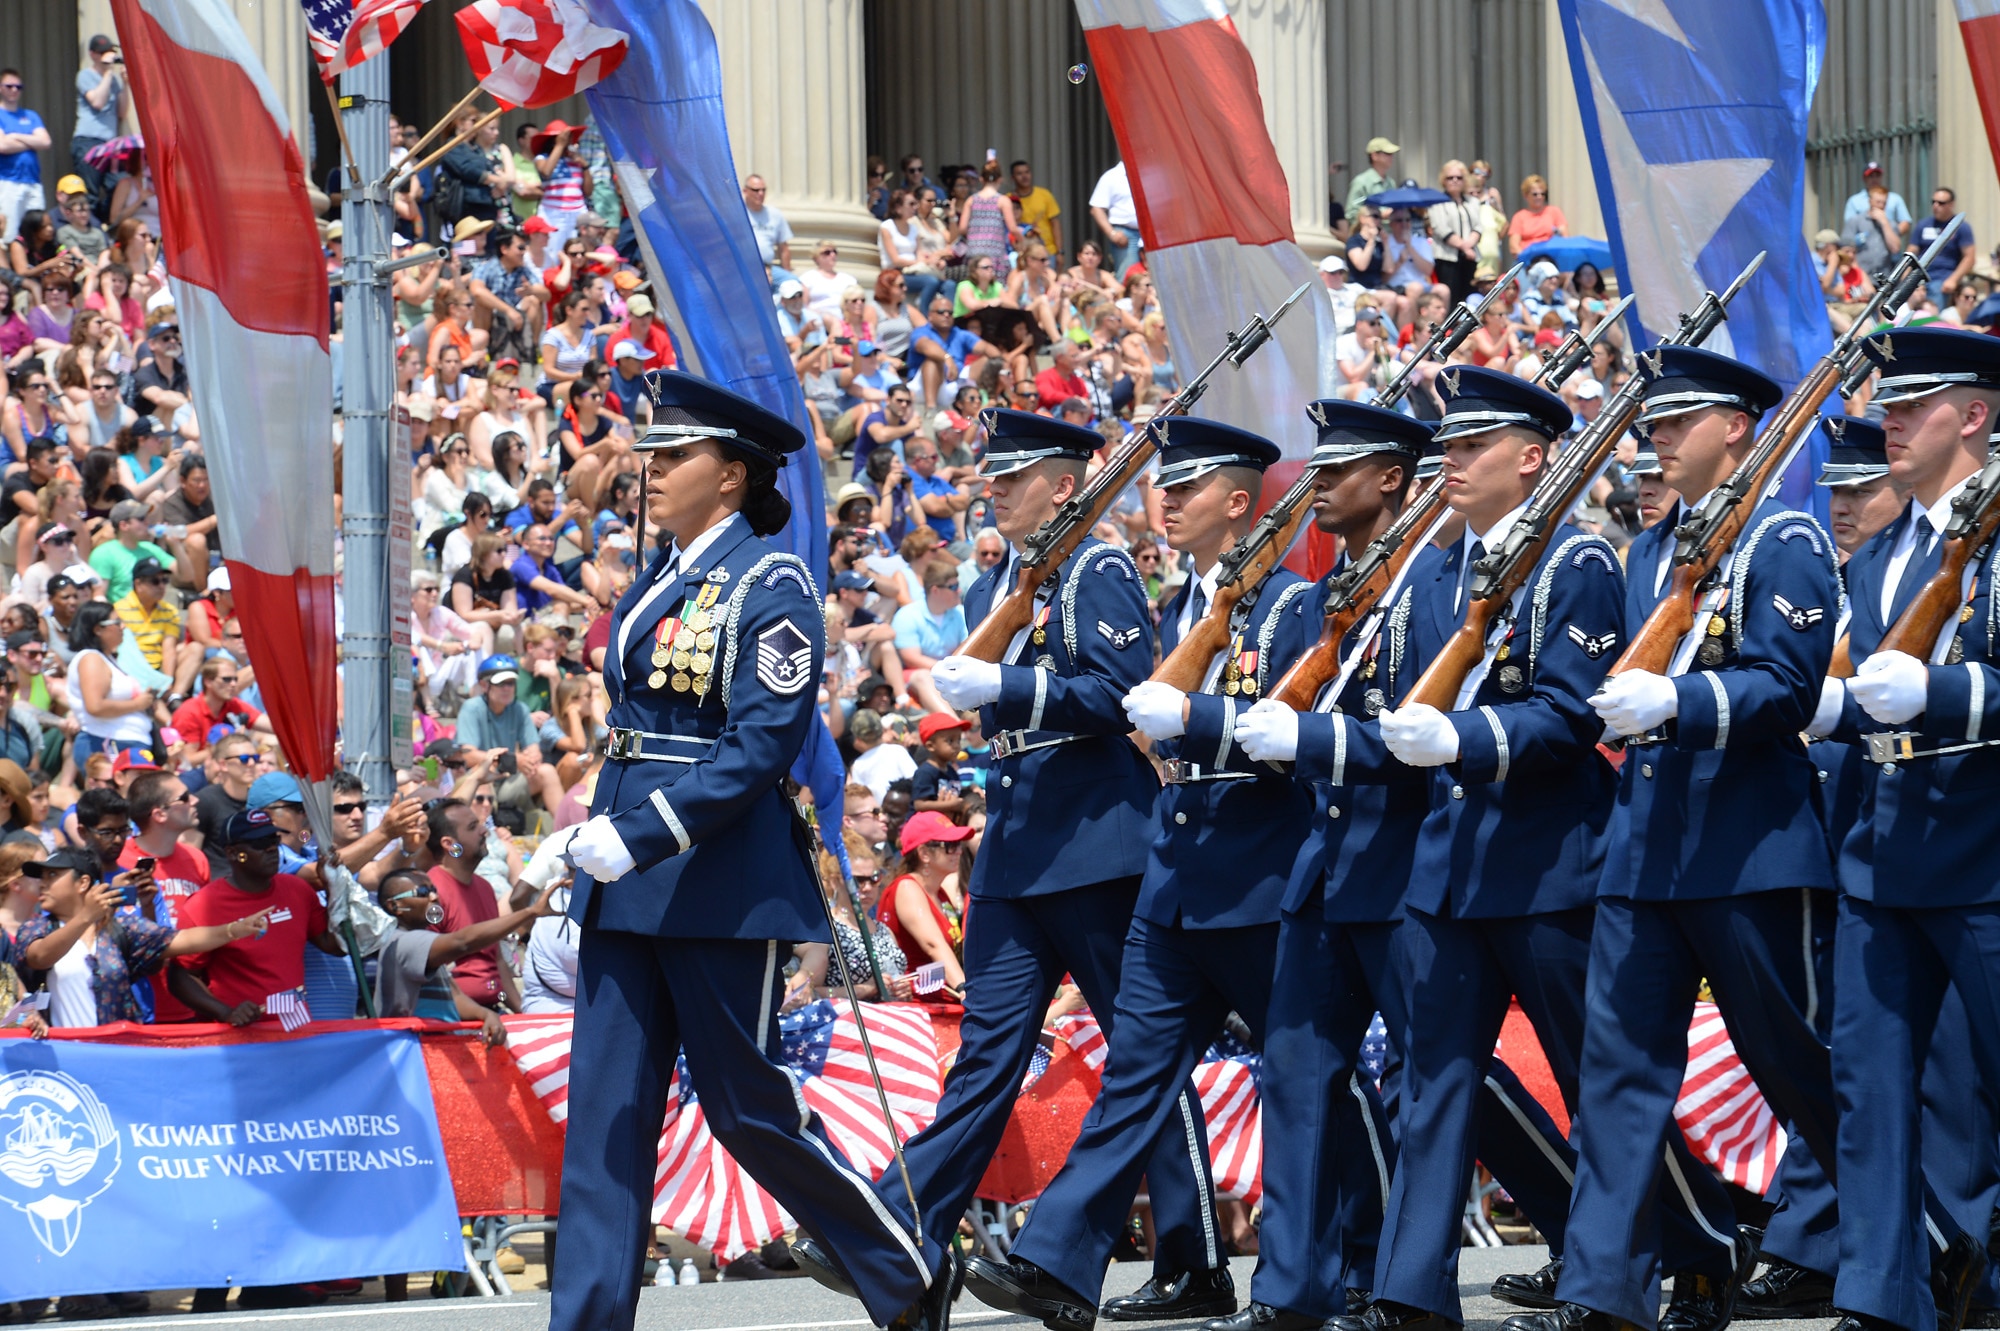 The U.S. Air Force Honor Guard marches during the National Memorial Day Parade in Washington, D.C., May 25, 2015. The National Memorial Day Parade was first launched in 2005 by the American Veterans Center in Washington. (U.S. Air Force photo/Scott M. Ash)